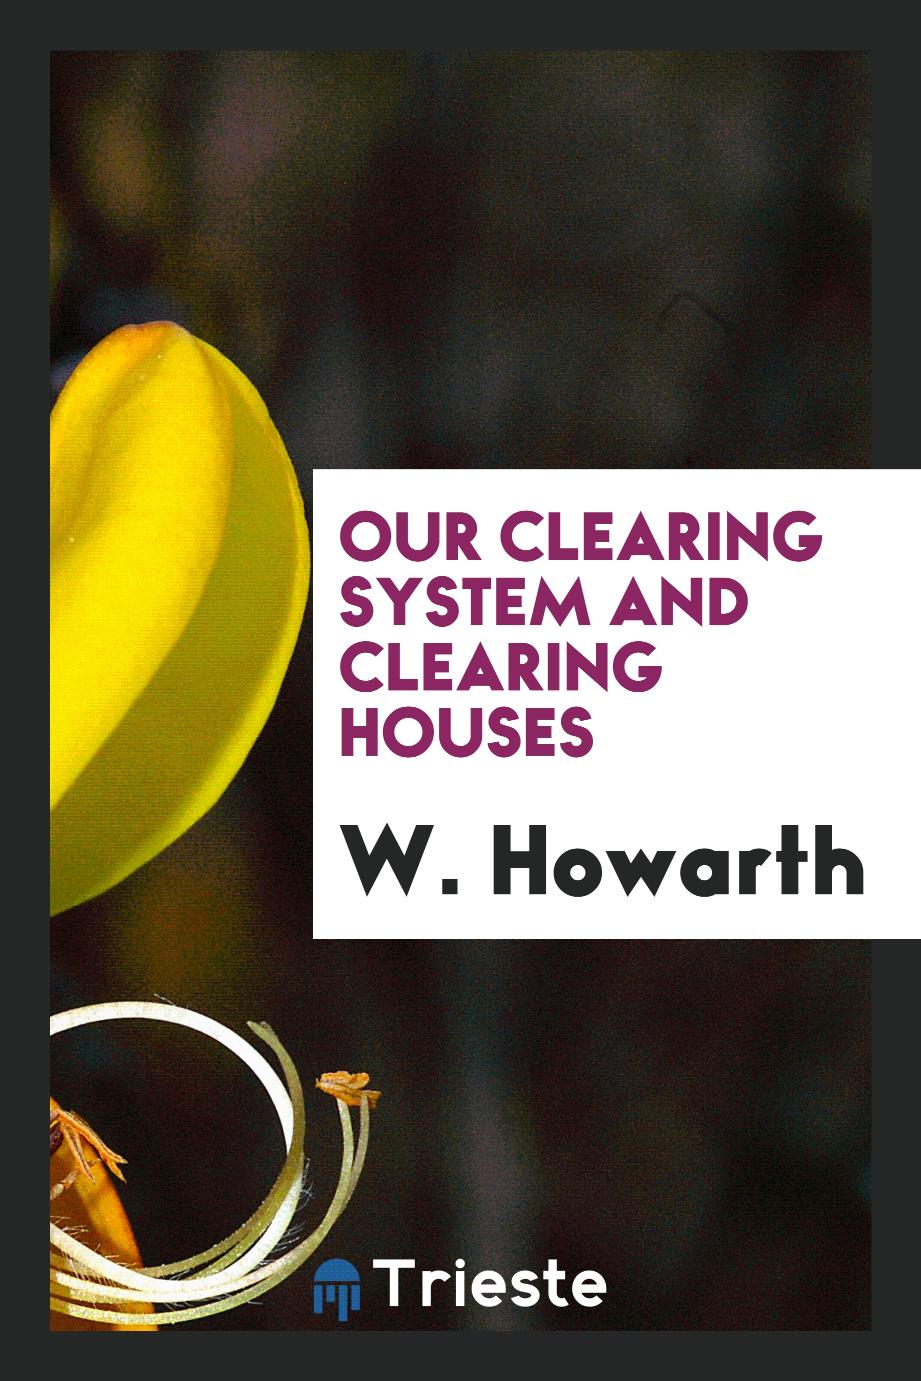 Our clearing system and clearing houses